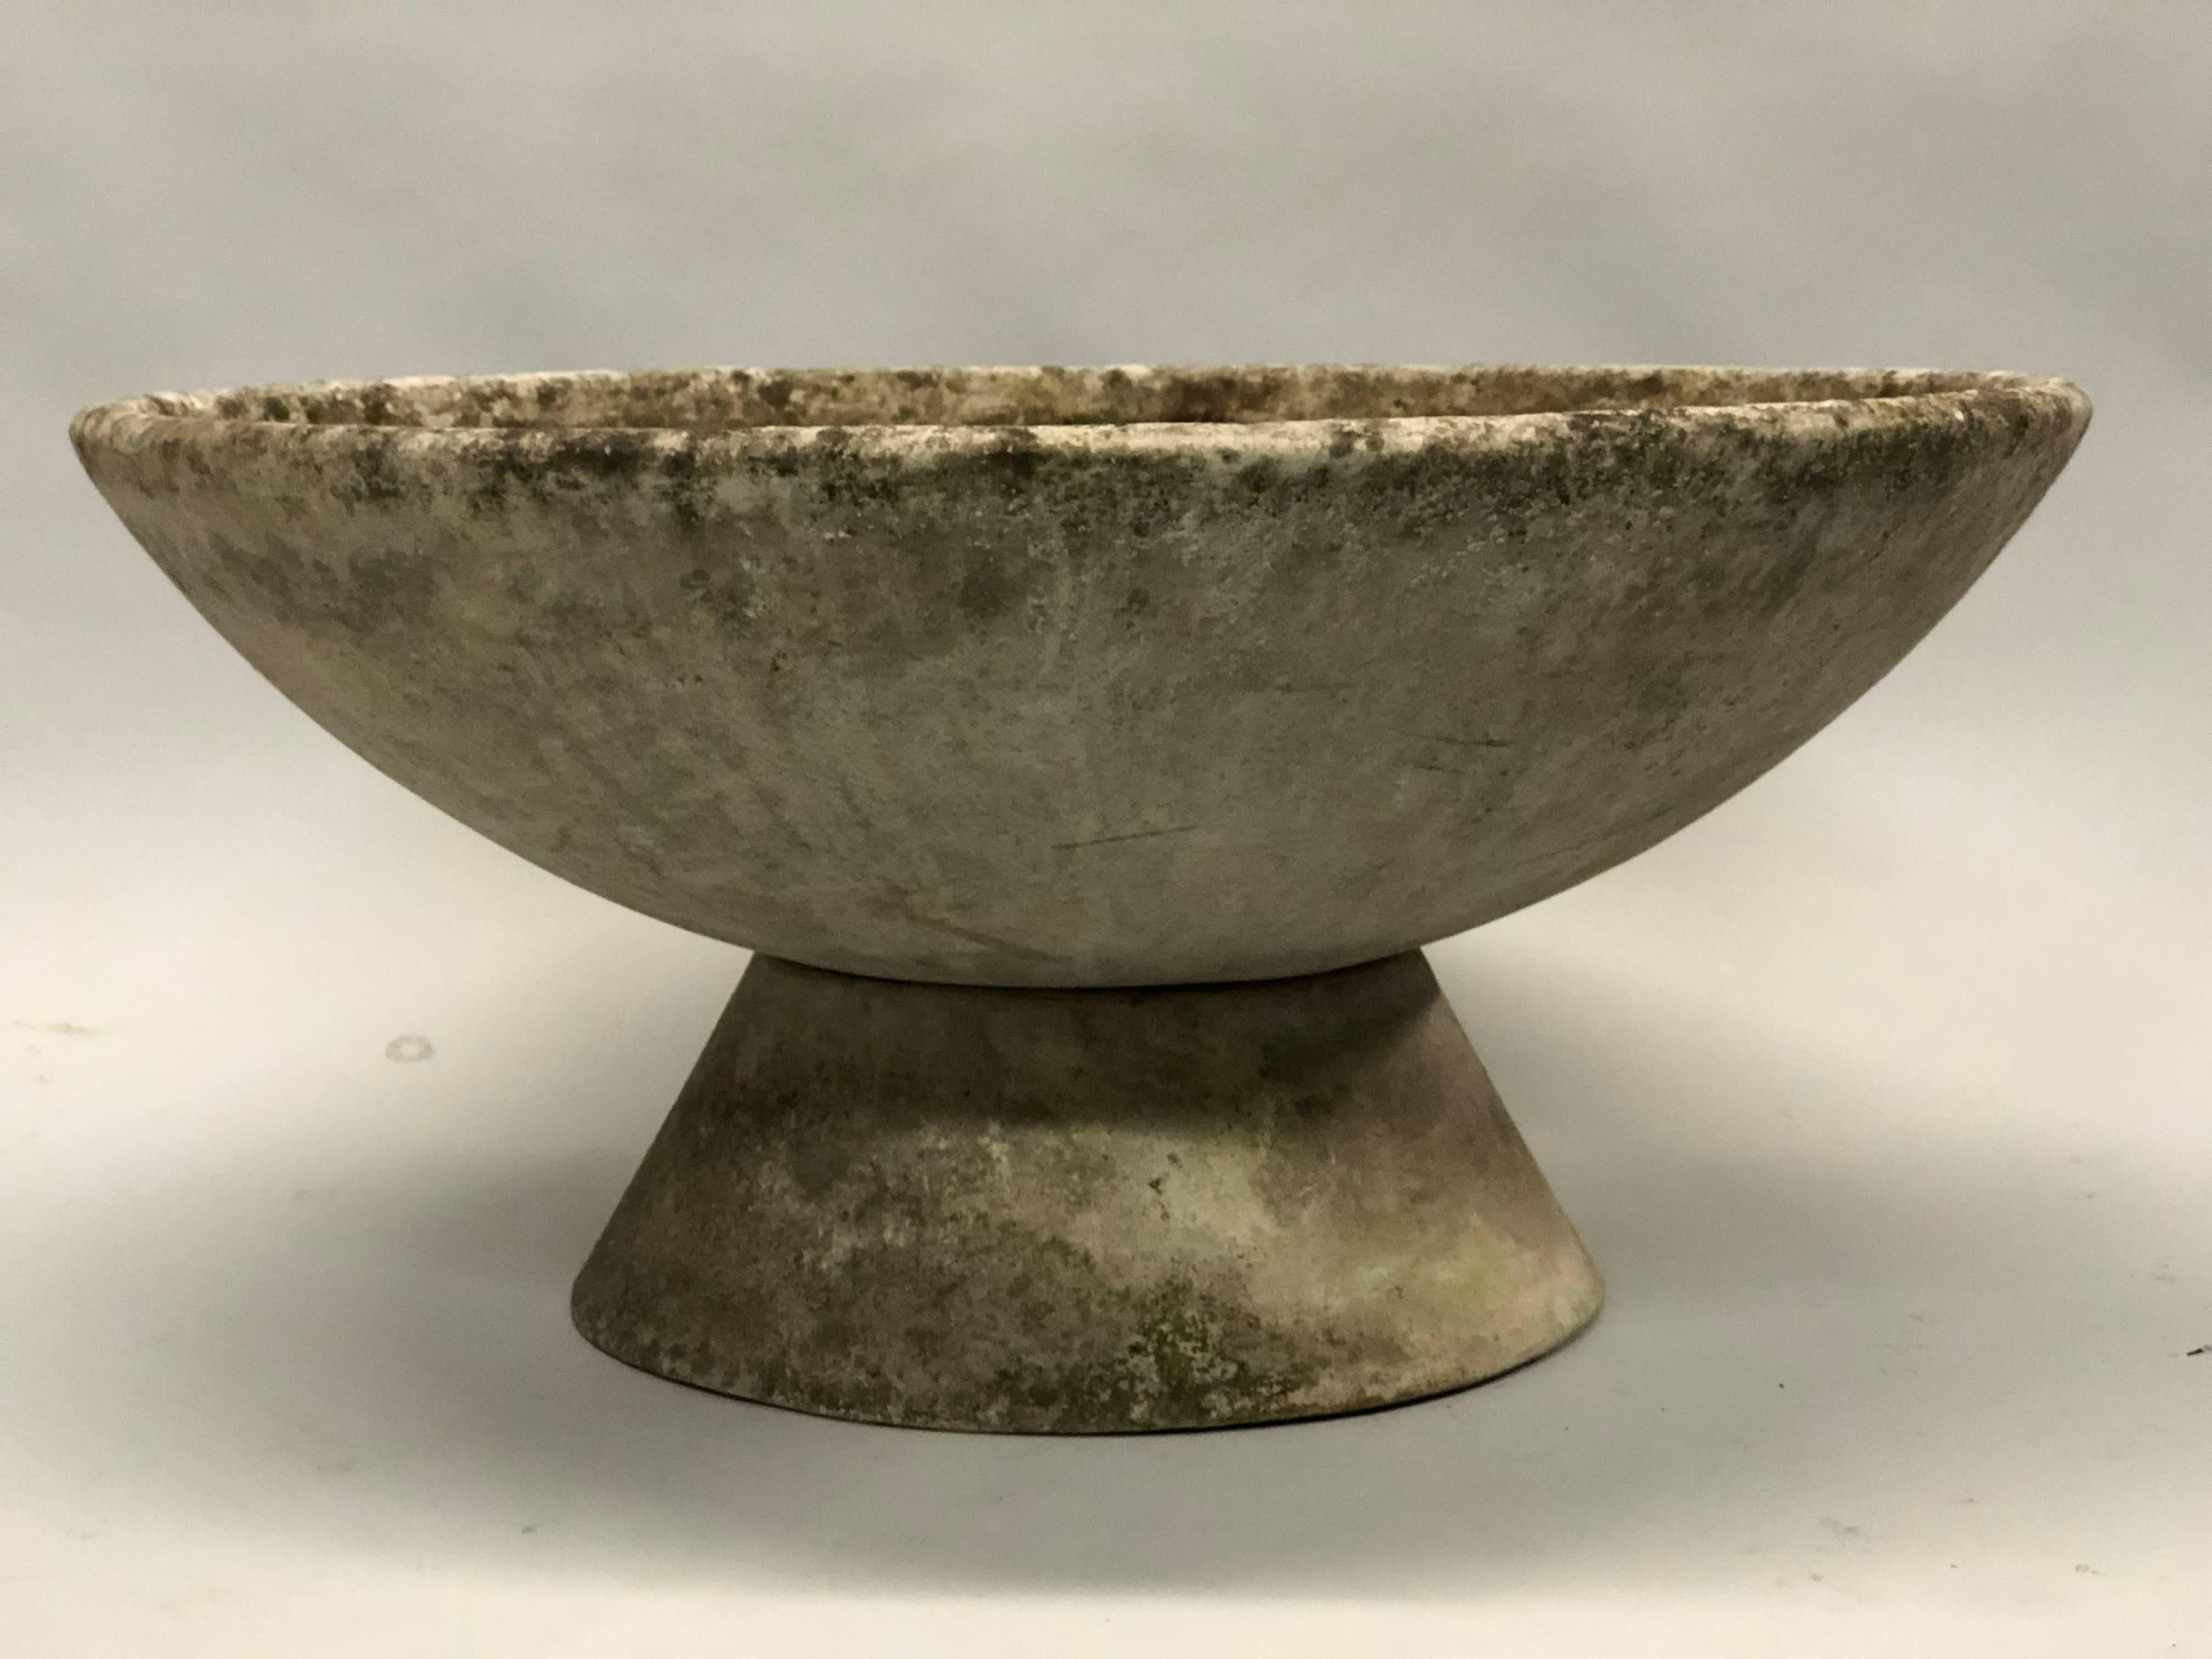  Large Swiss fiber concrete architectural planters / vases / urns / jardinières set on fiber concrete plinth bases. Priced and sold individually.
References: Architectural Pottery, Willy Guhl, Garden Furniture.